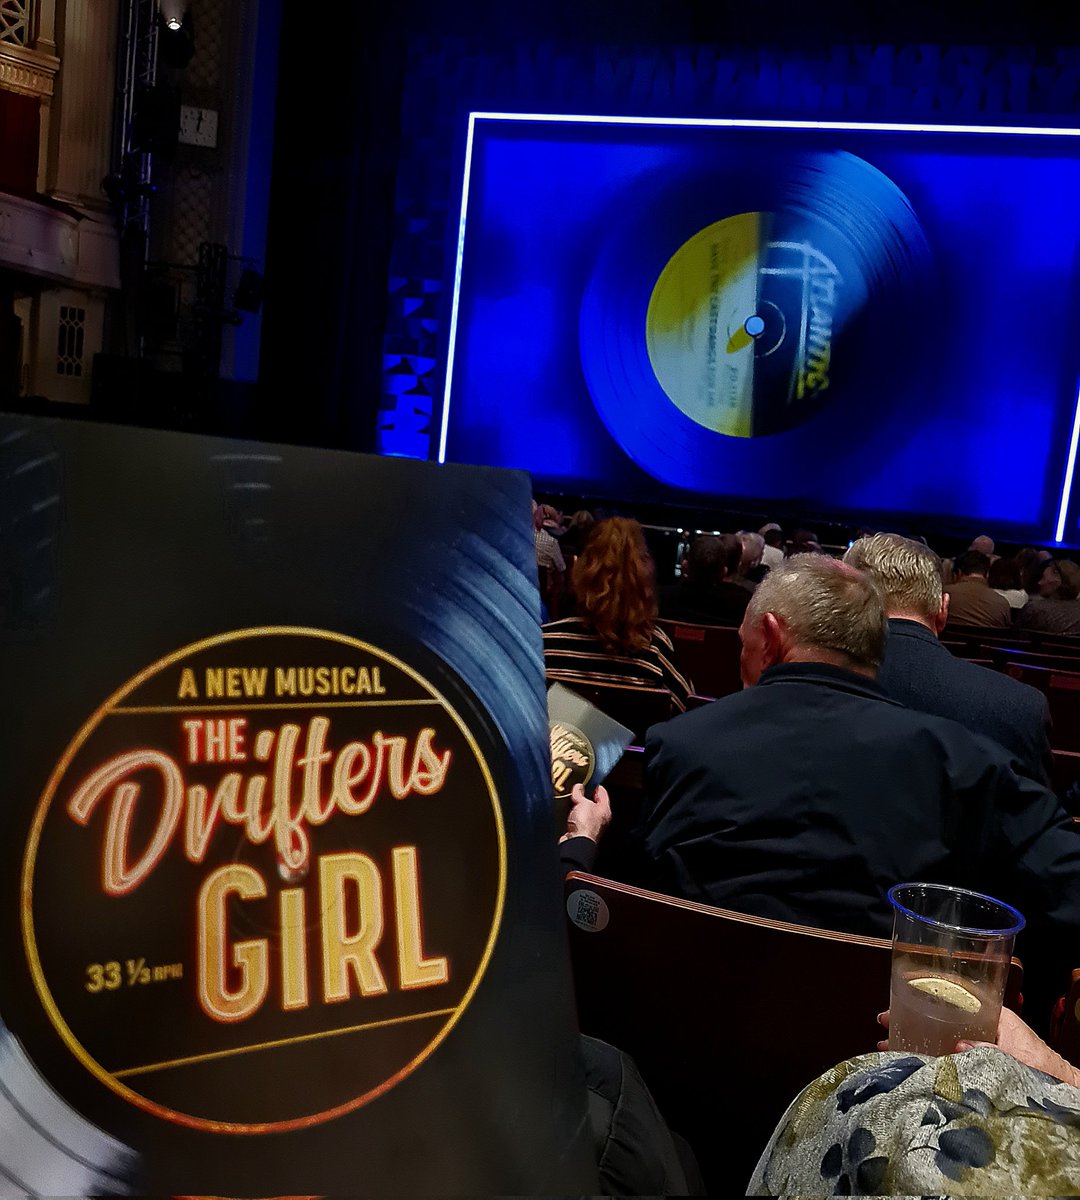 Show two, and it's back to #Edinburgh to catch @thedriftersgirl at the @edinplayhouse! Running until May 4th, now is your chance to catch the smash-hit show in #Edinburgh. 🎤